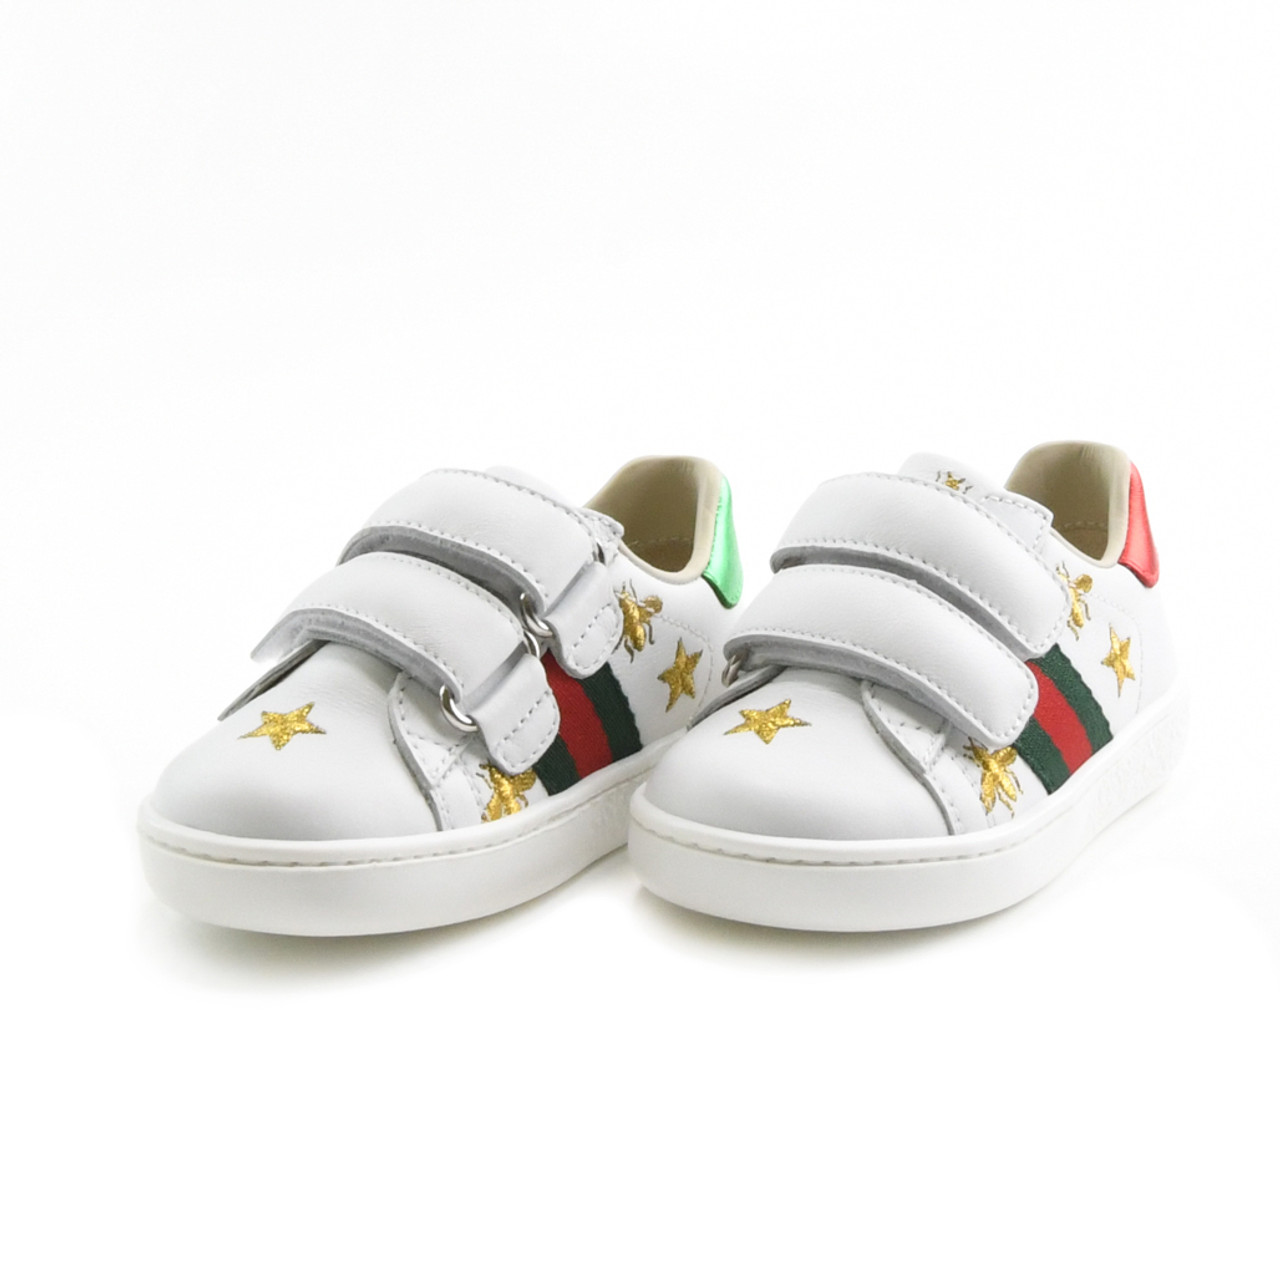 Designer Baby: More Expensive Baby Shoes from Gucci